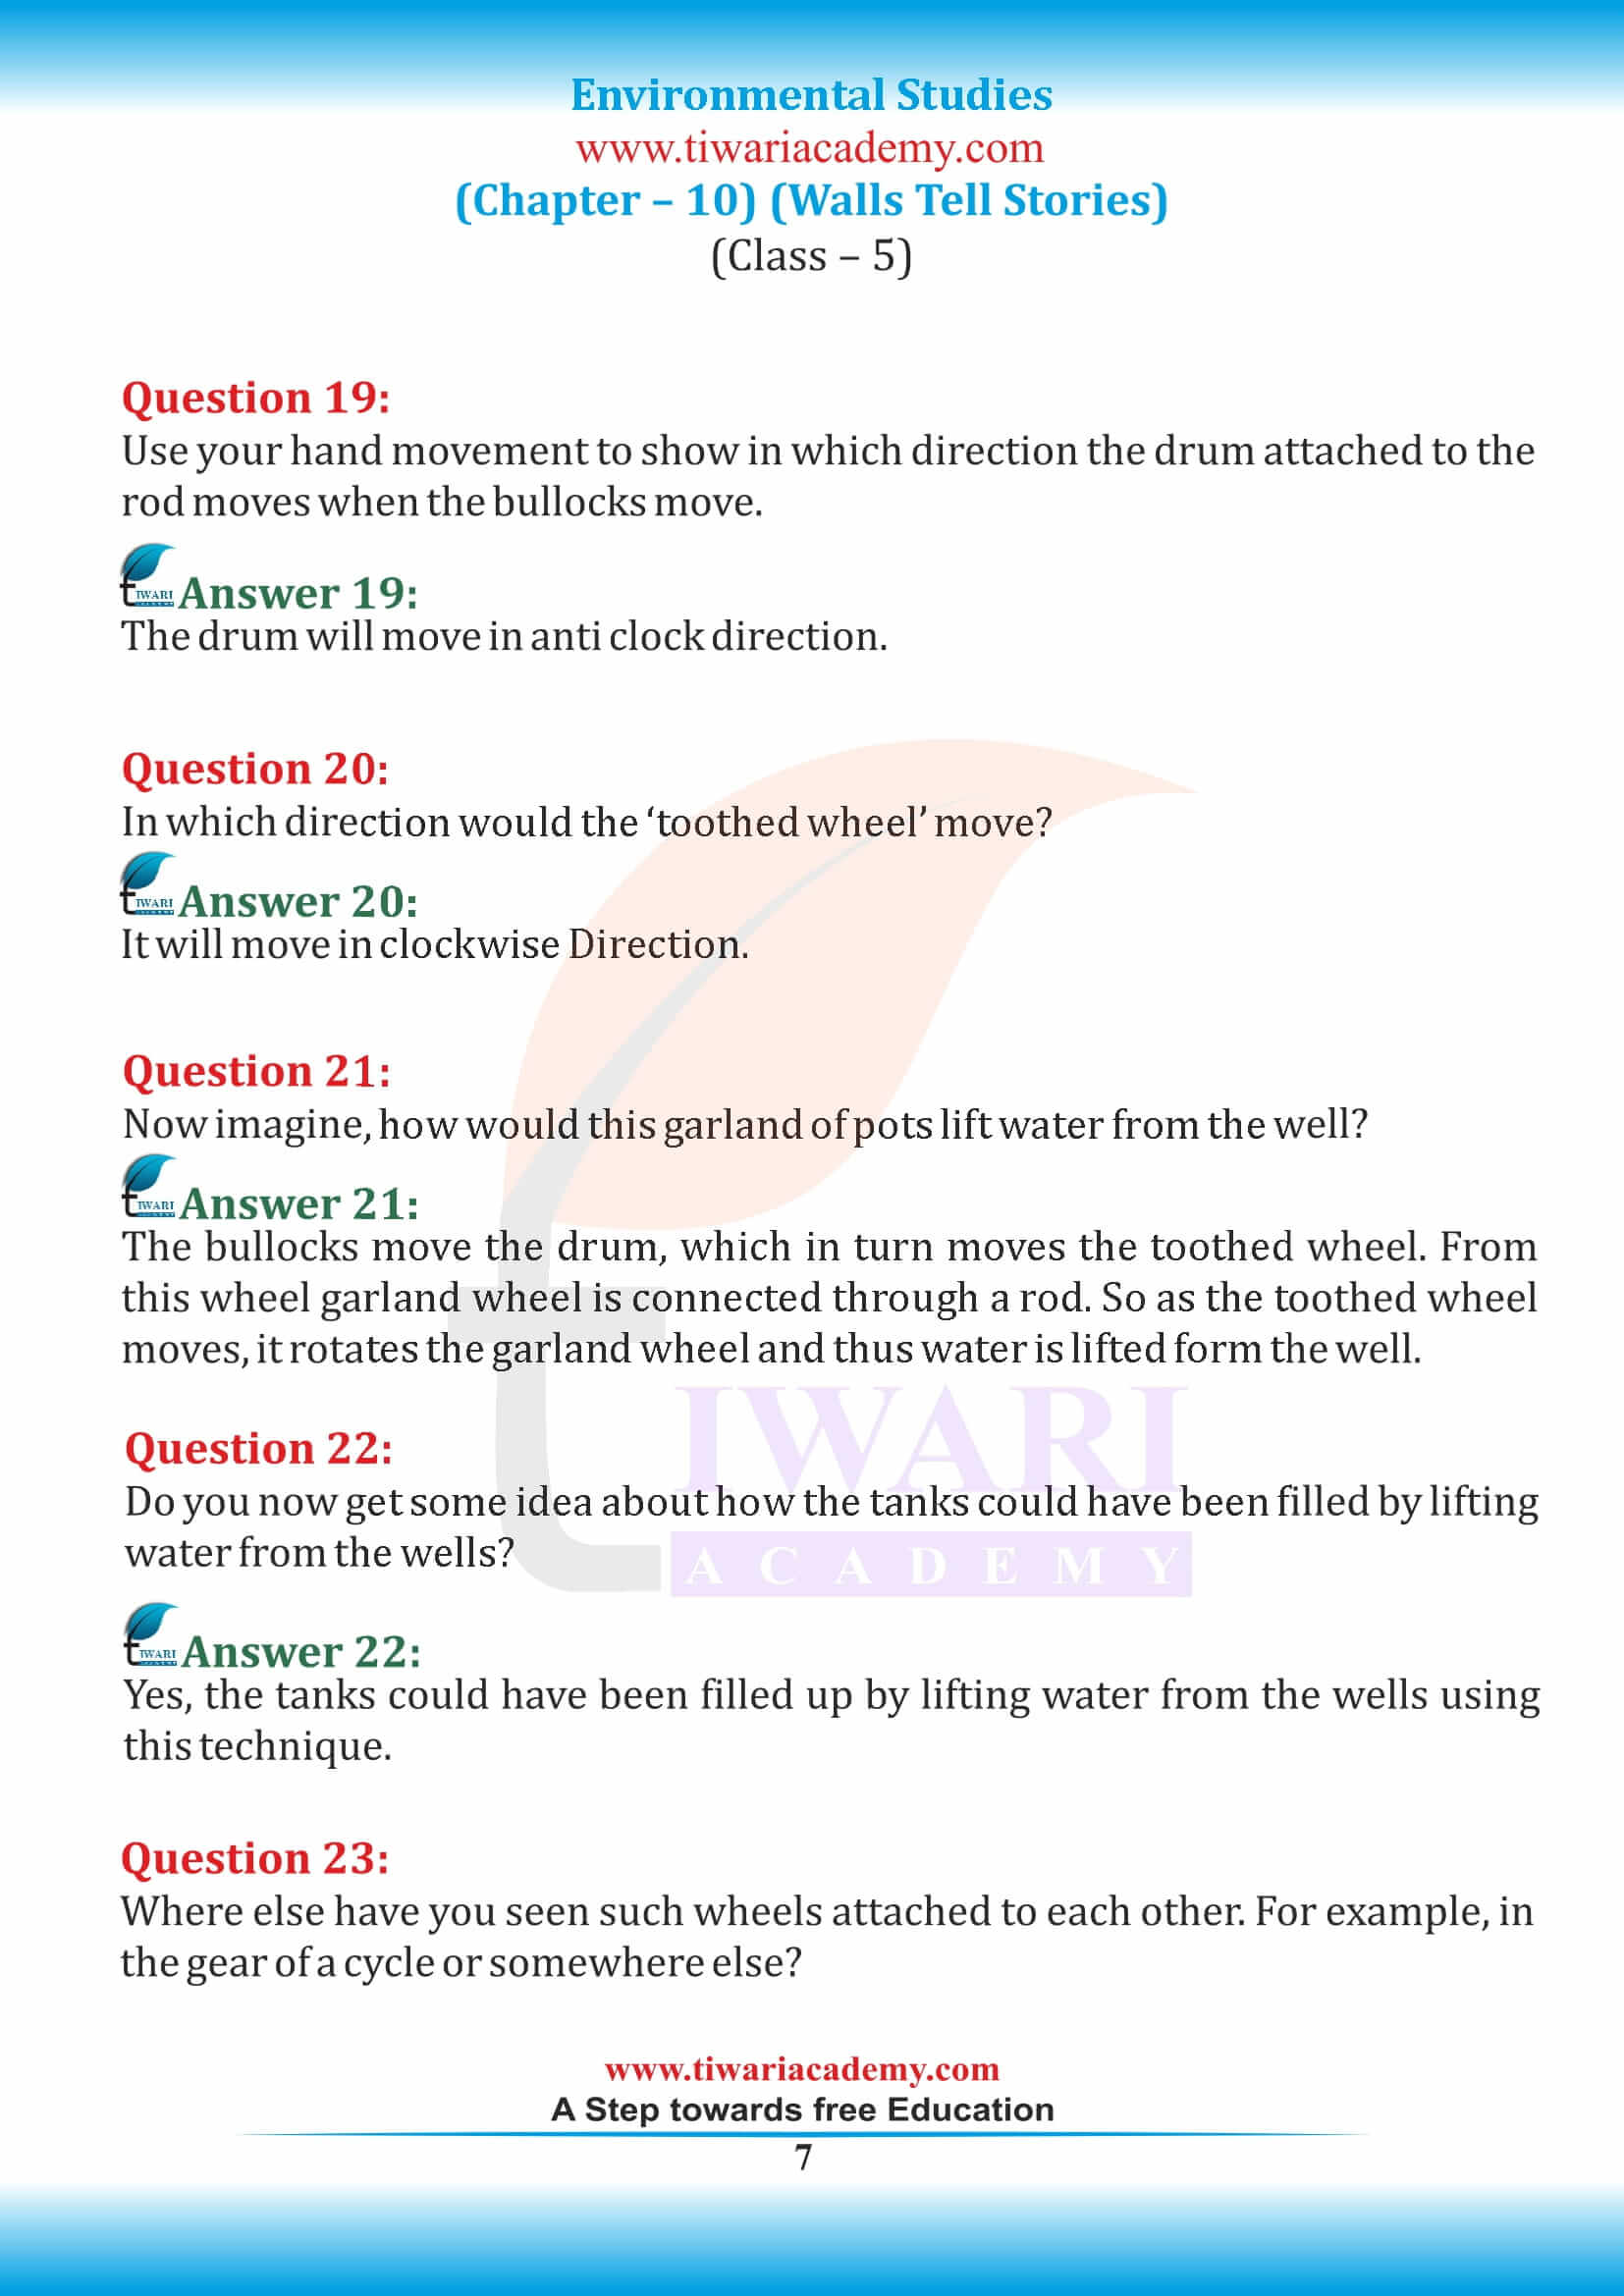 NCERT Solutions for Class 5 EVS Chapter 10 question answers